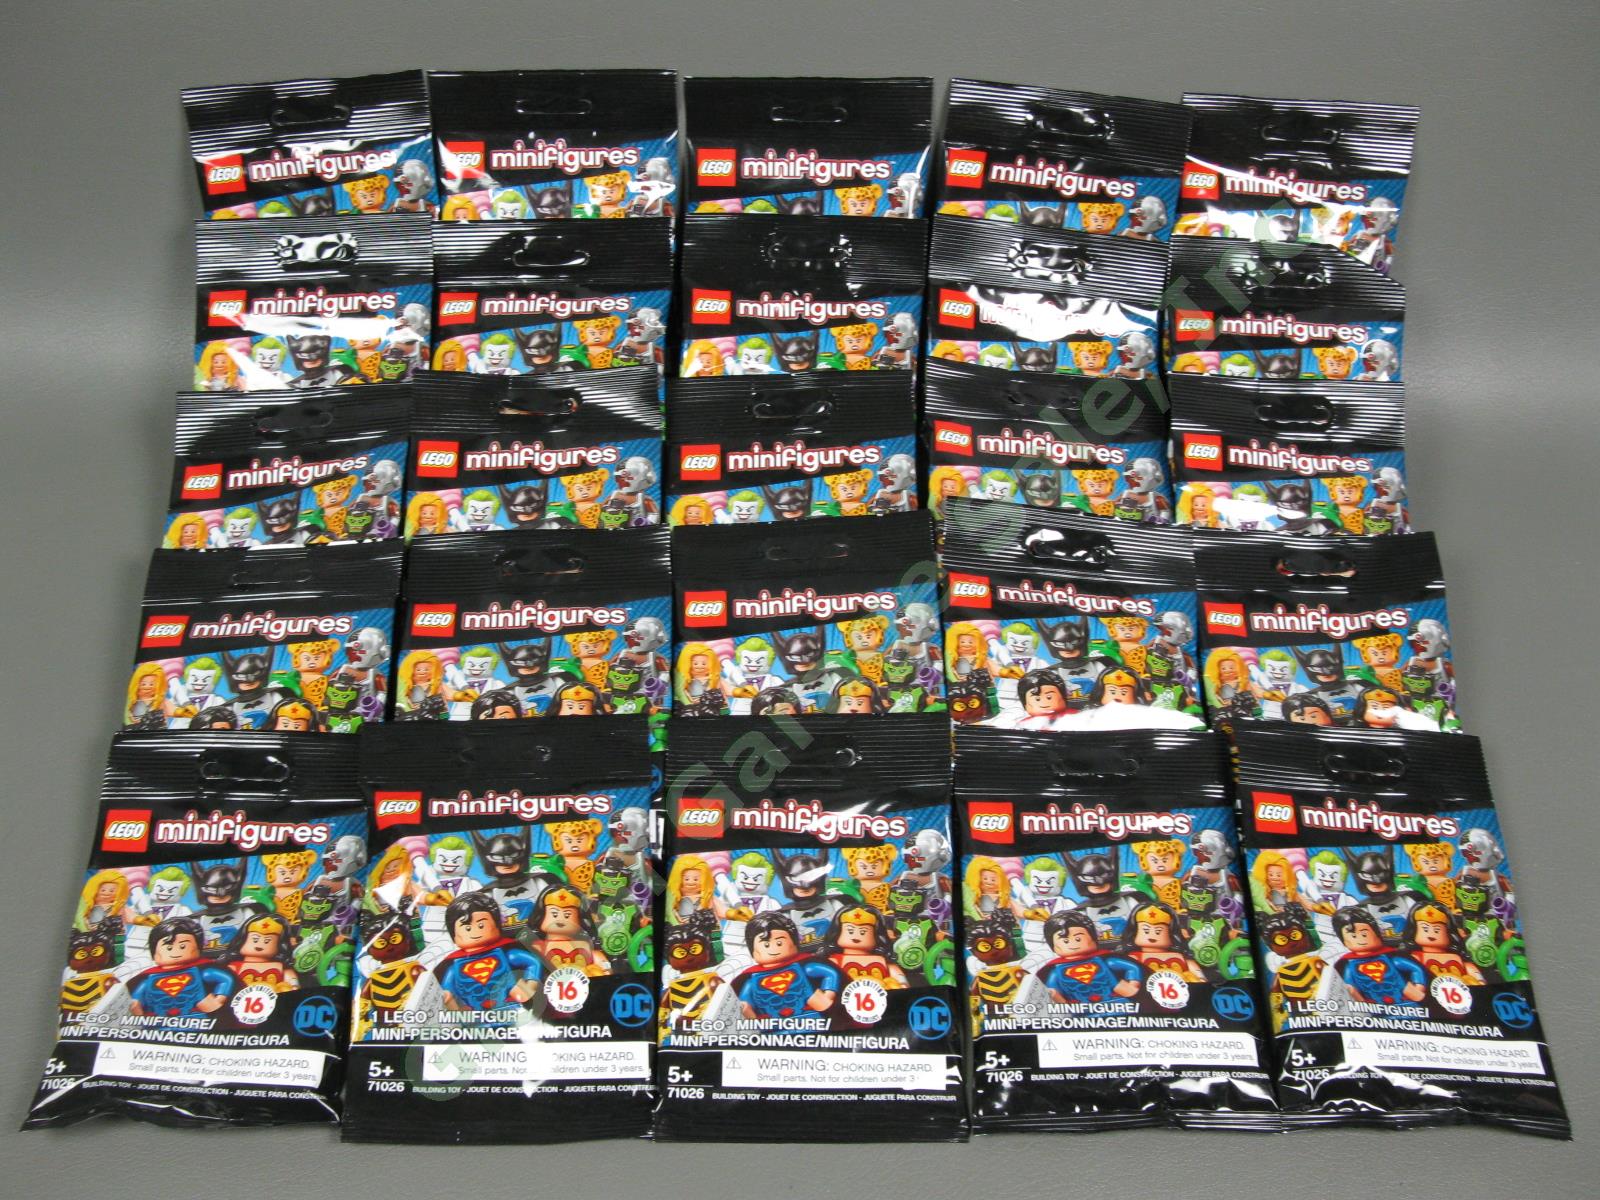 25 Packs Lego DC Superheroes Limited Edition Character Minifigures Lot 71026 NR